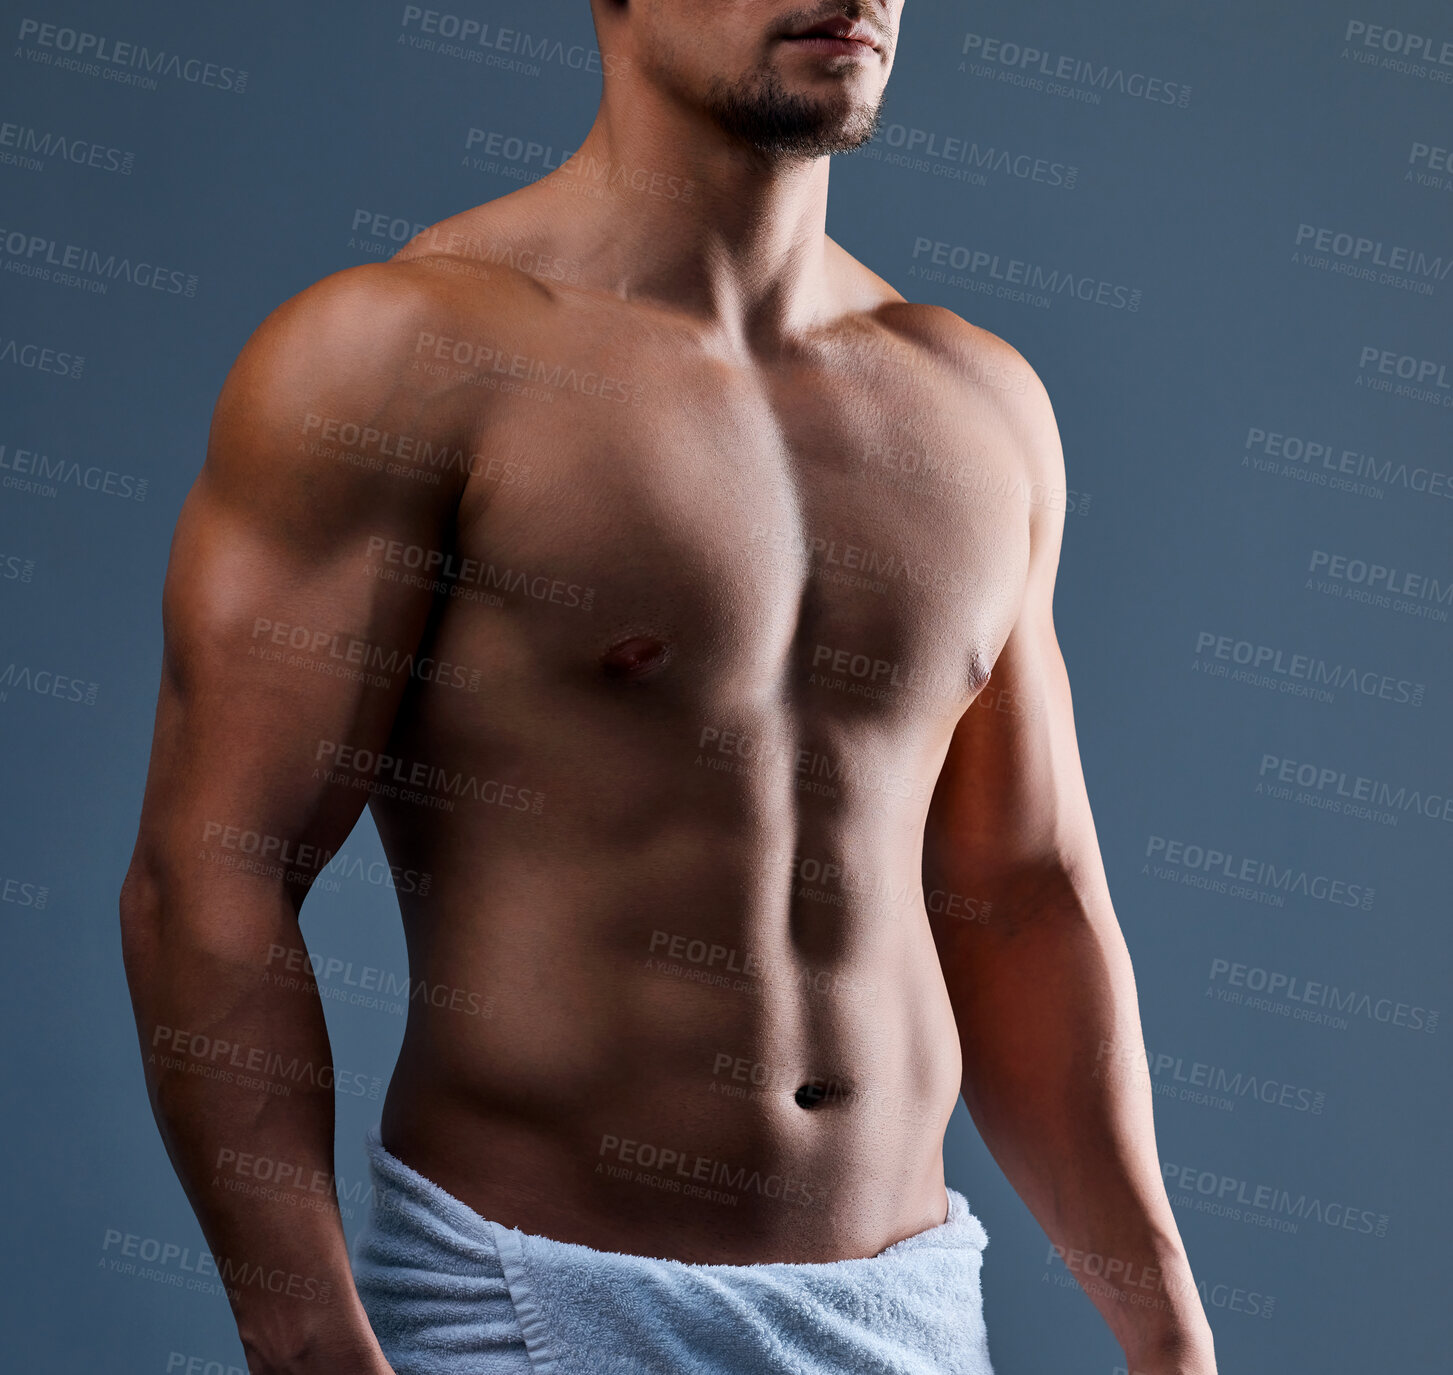 Buy stock photo Cropped shot of an unrecognizable man posing in a towel against a grey background